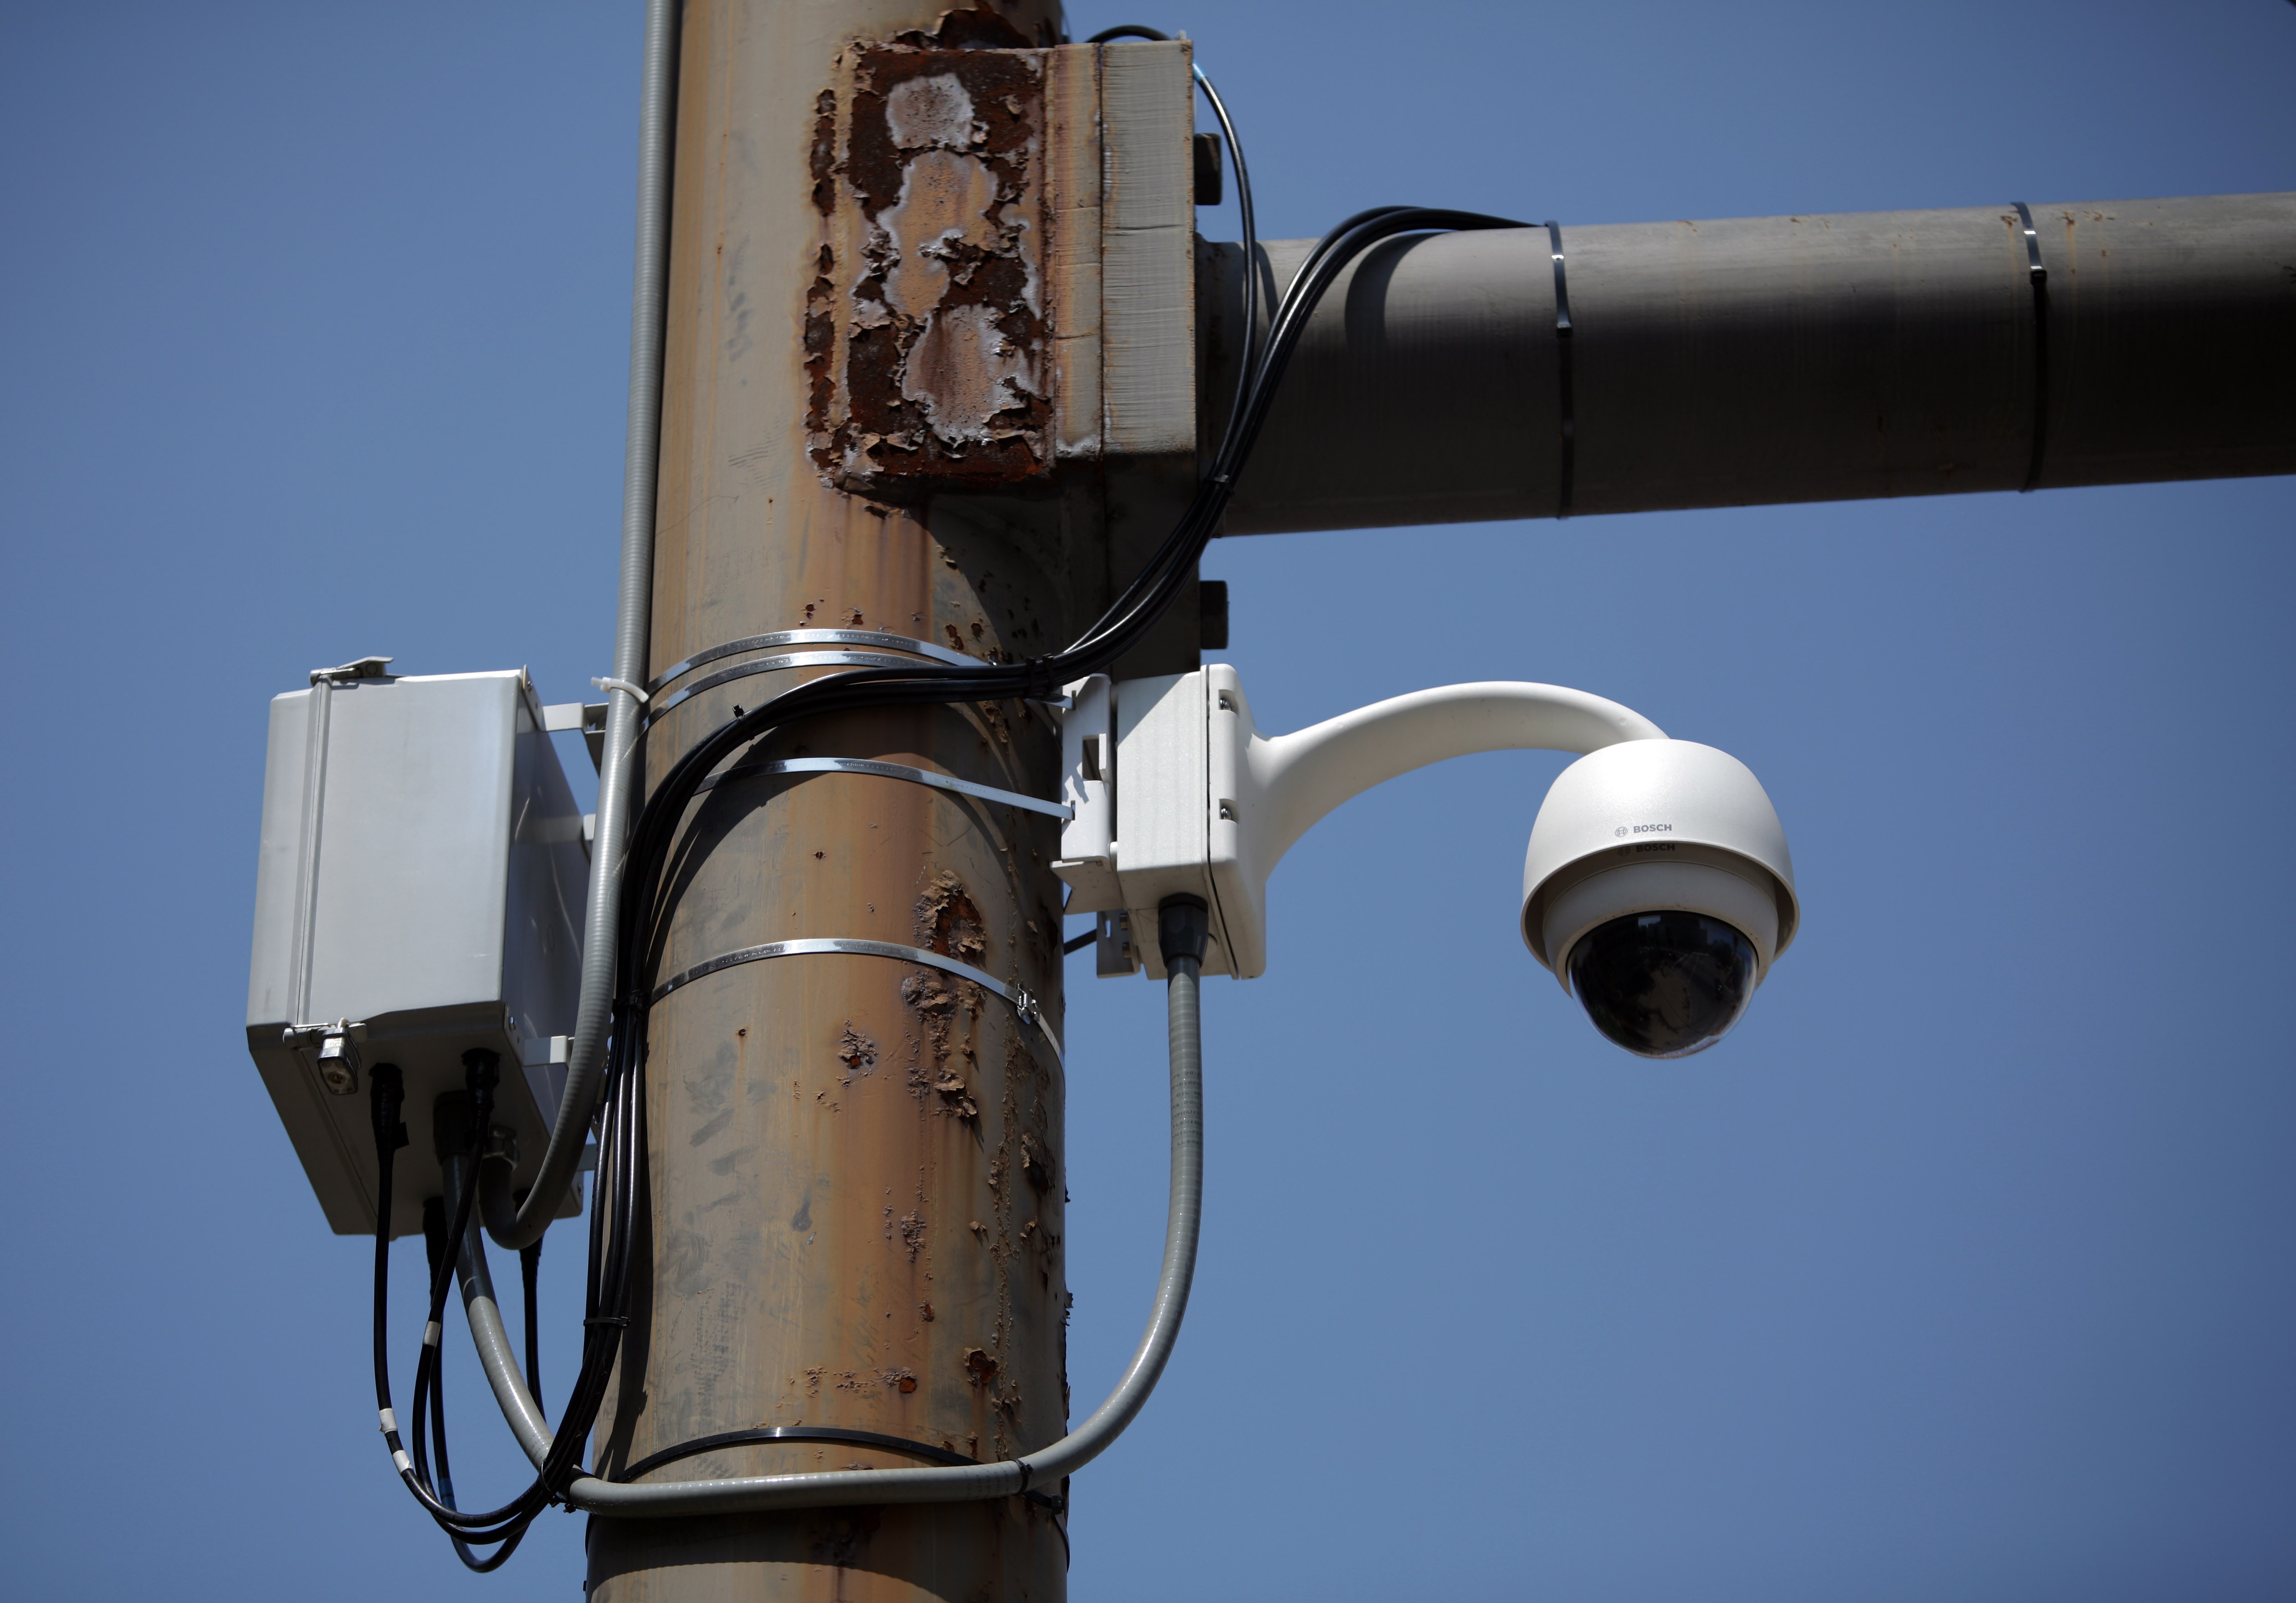 What is the law on security cameras?